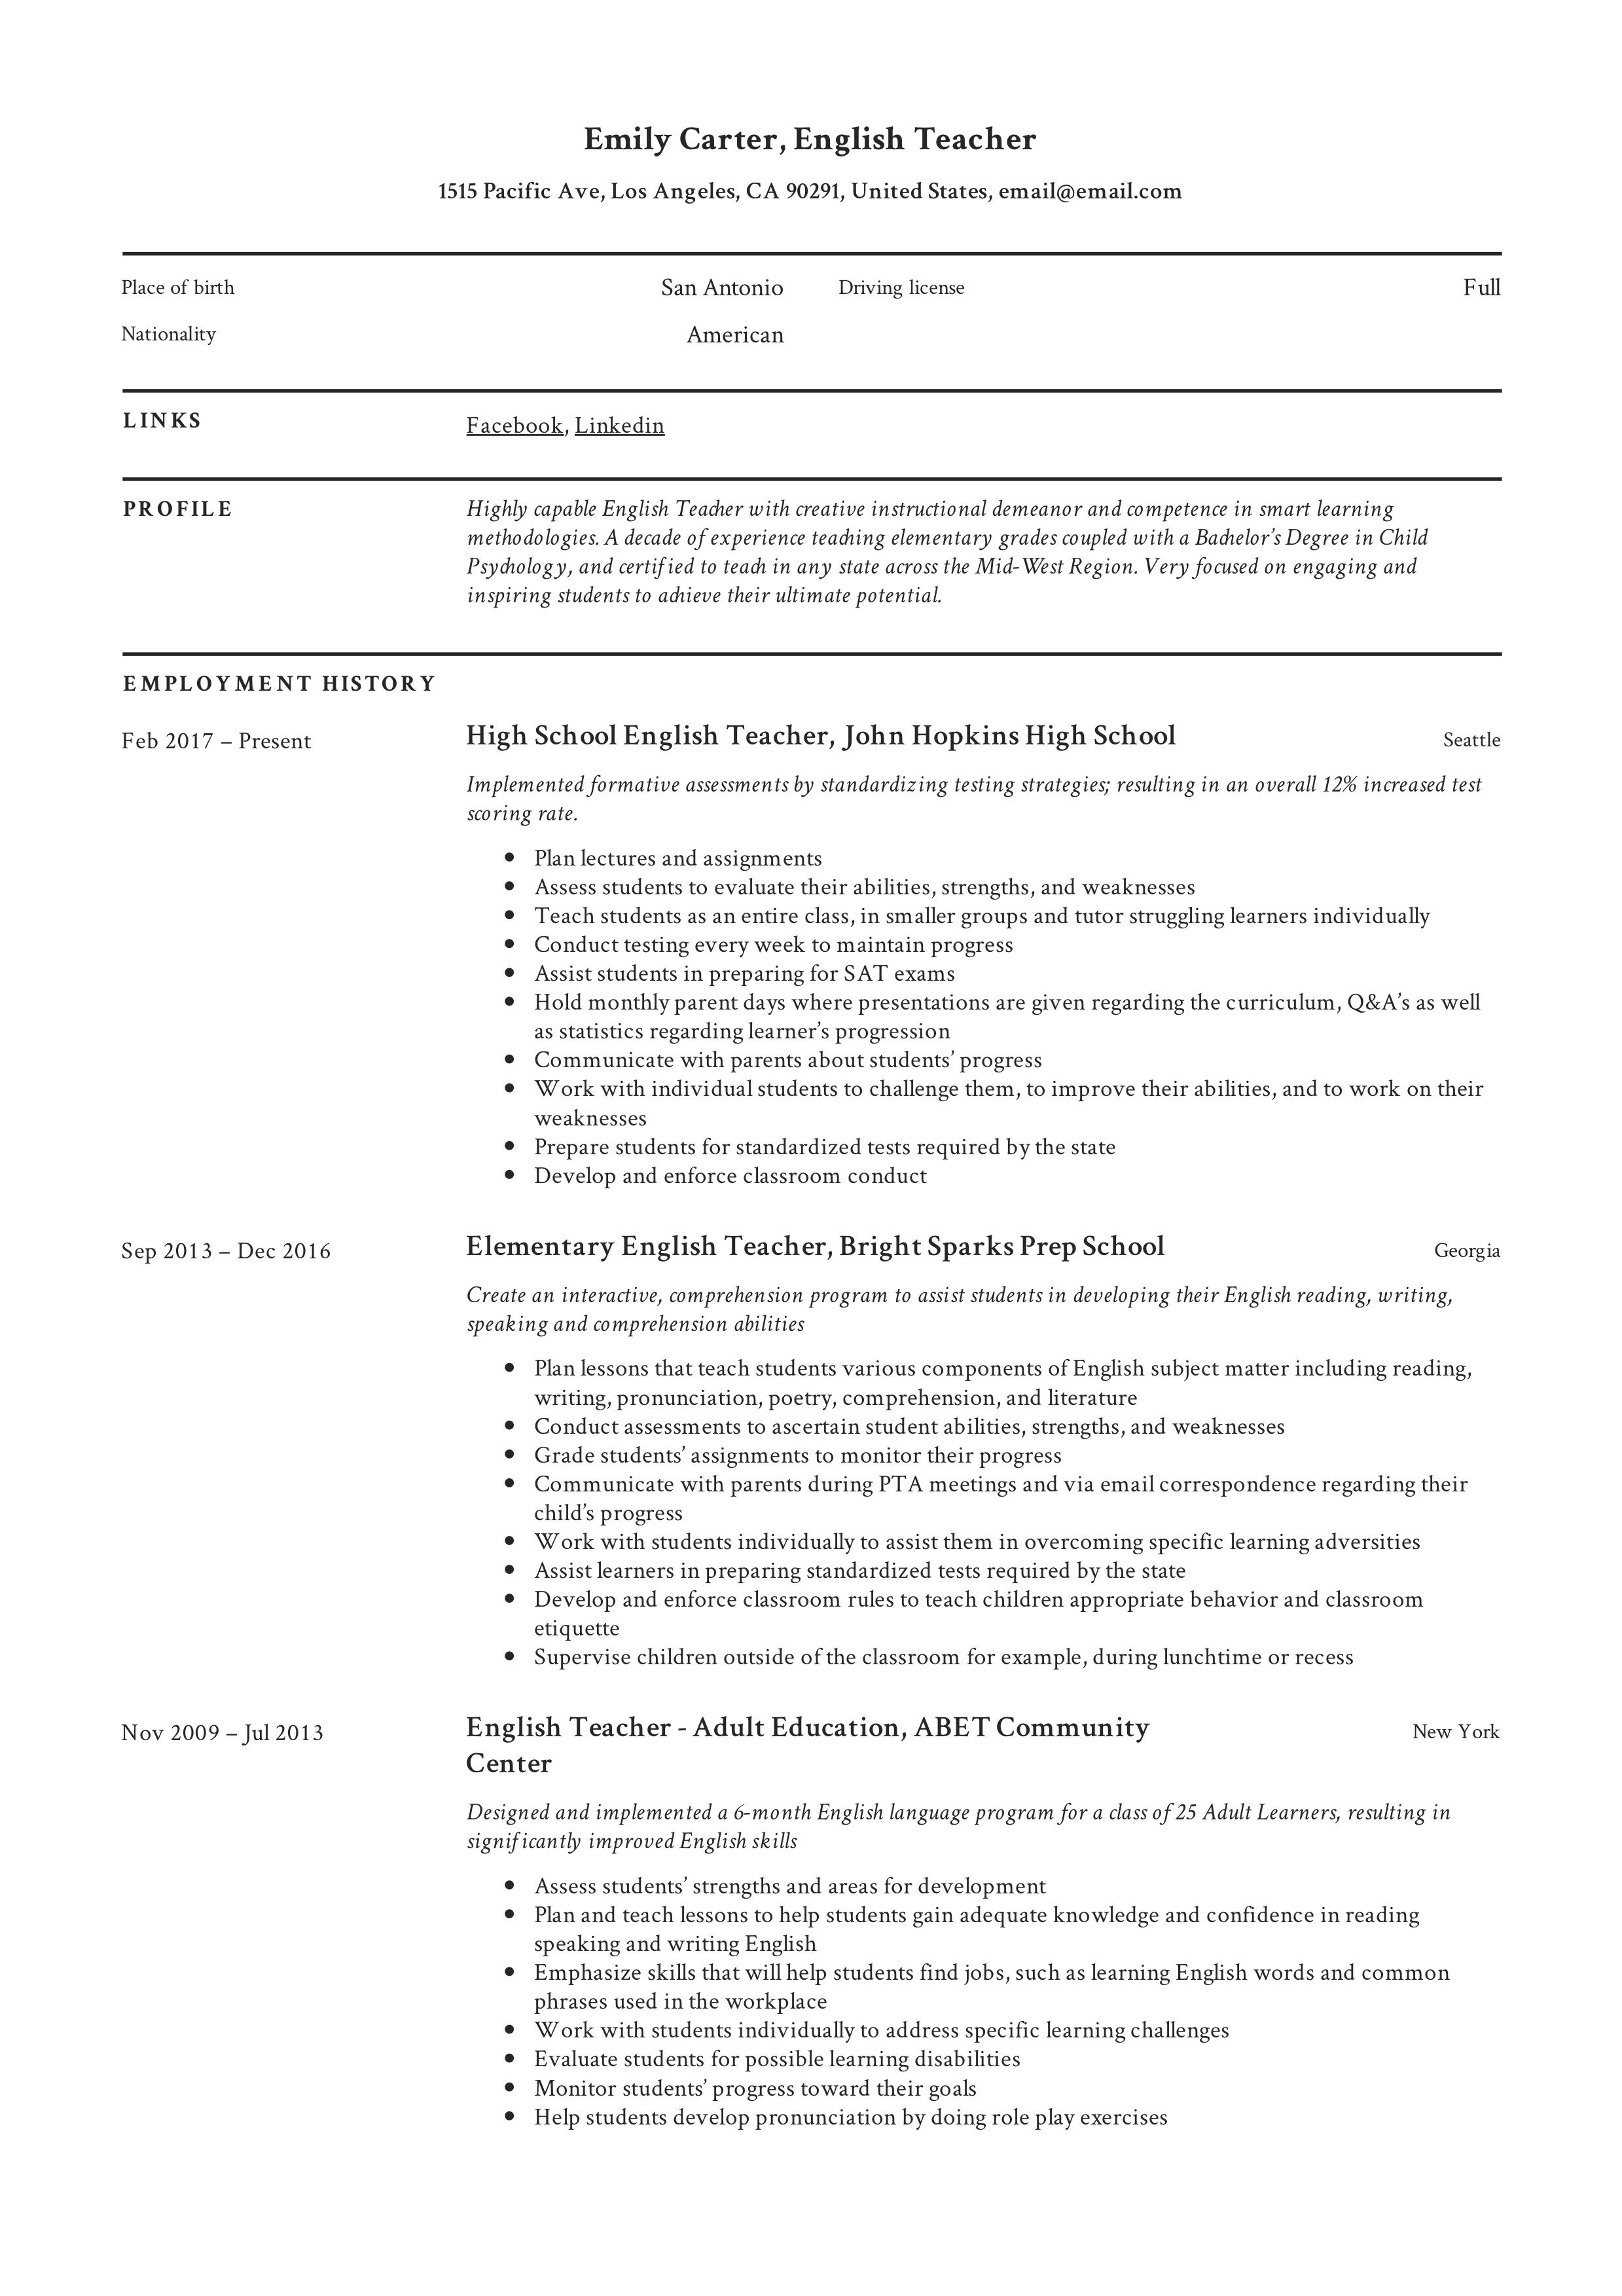 Resume Templates [2019] | PDF and Word | Free Downloads ...